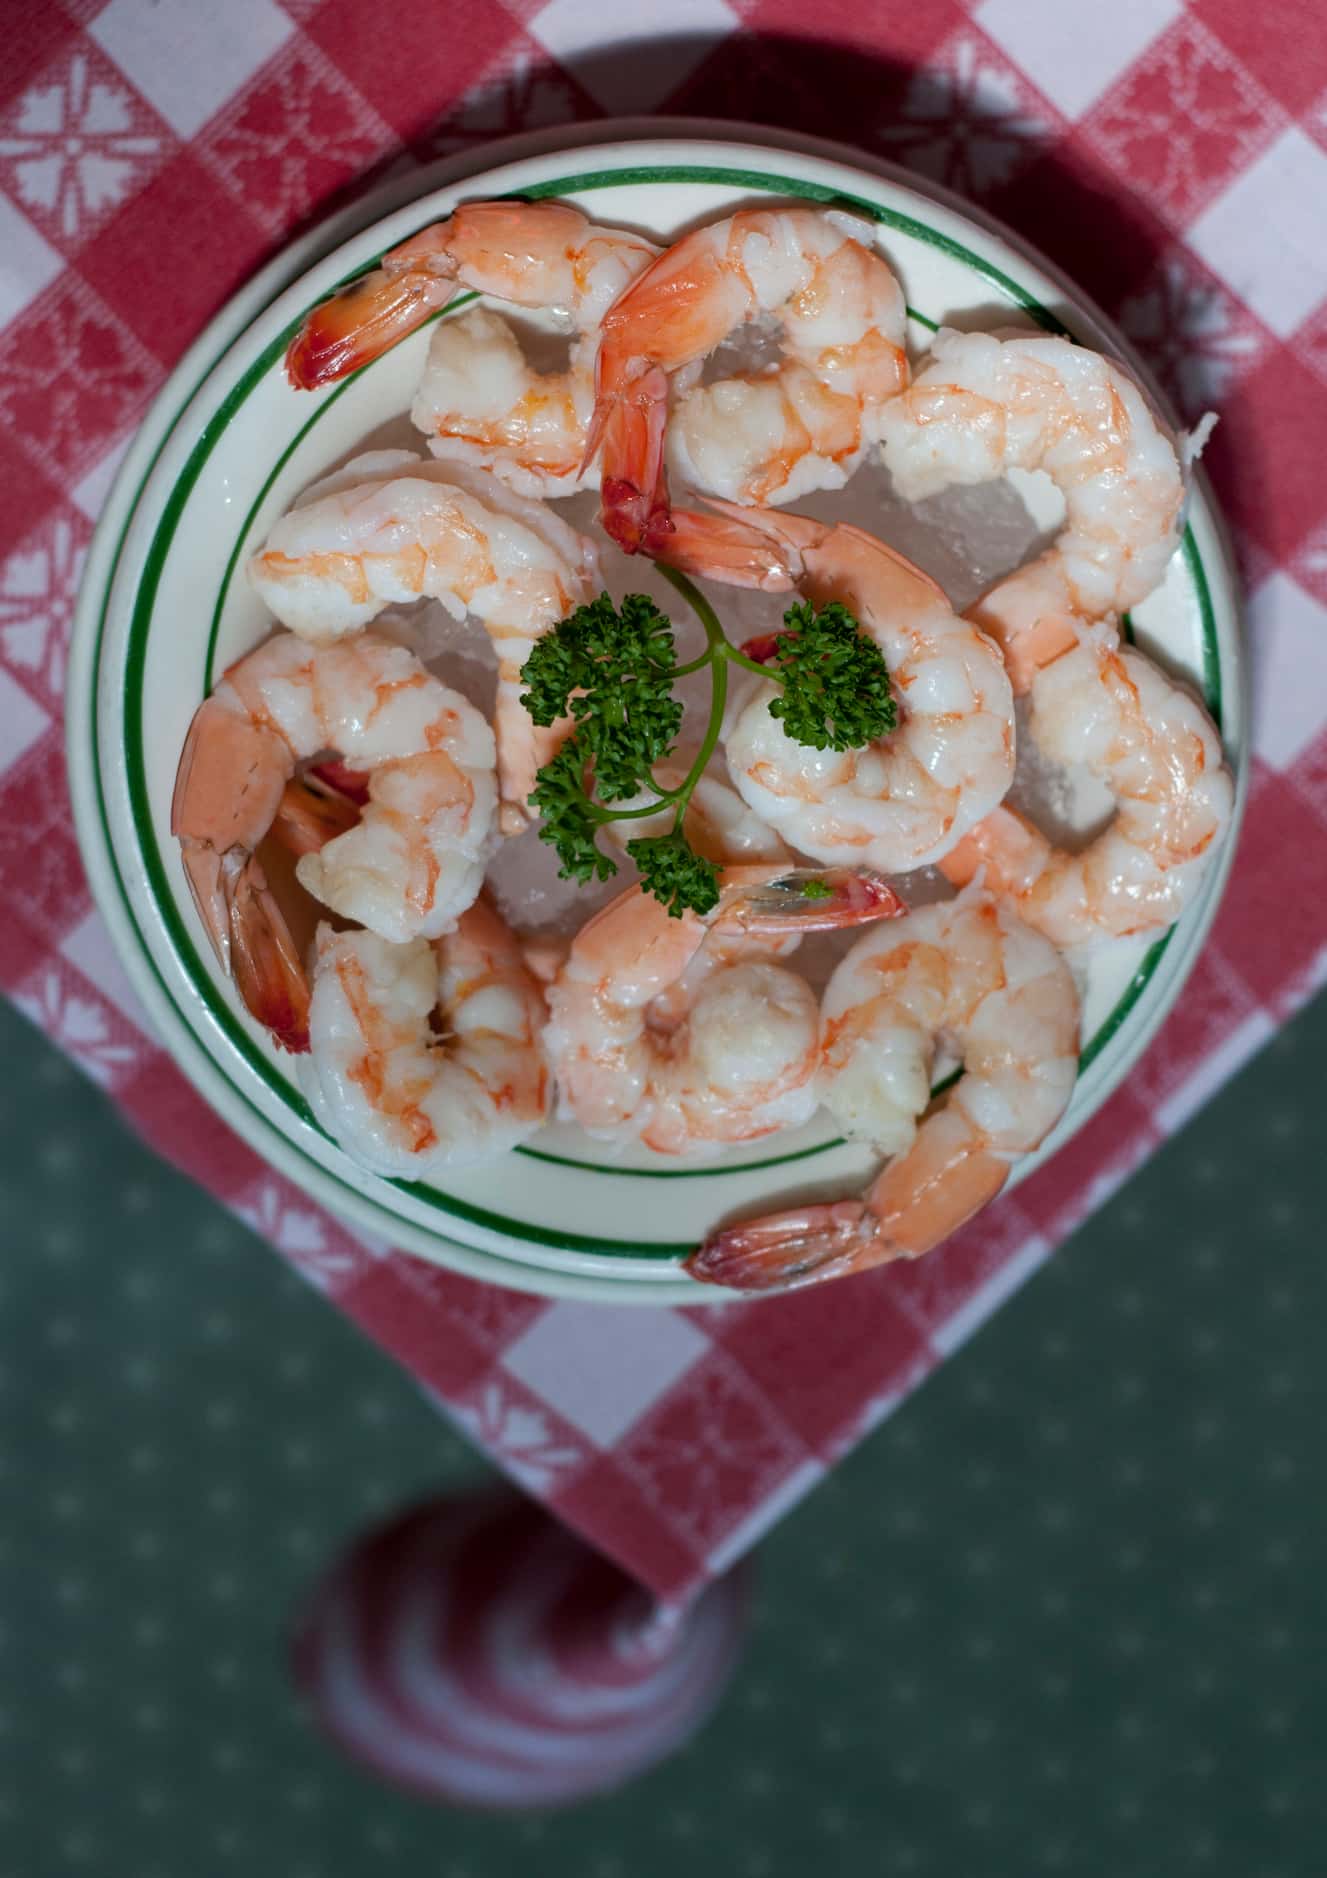 The serving of boiled shrimp at S&D Oyster Company in Dallas is often generous.